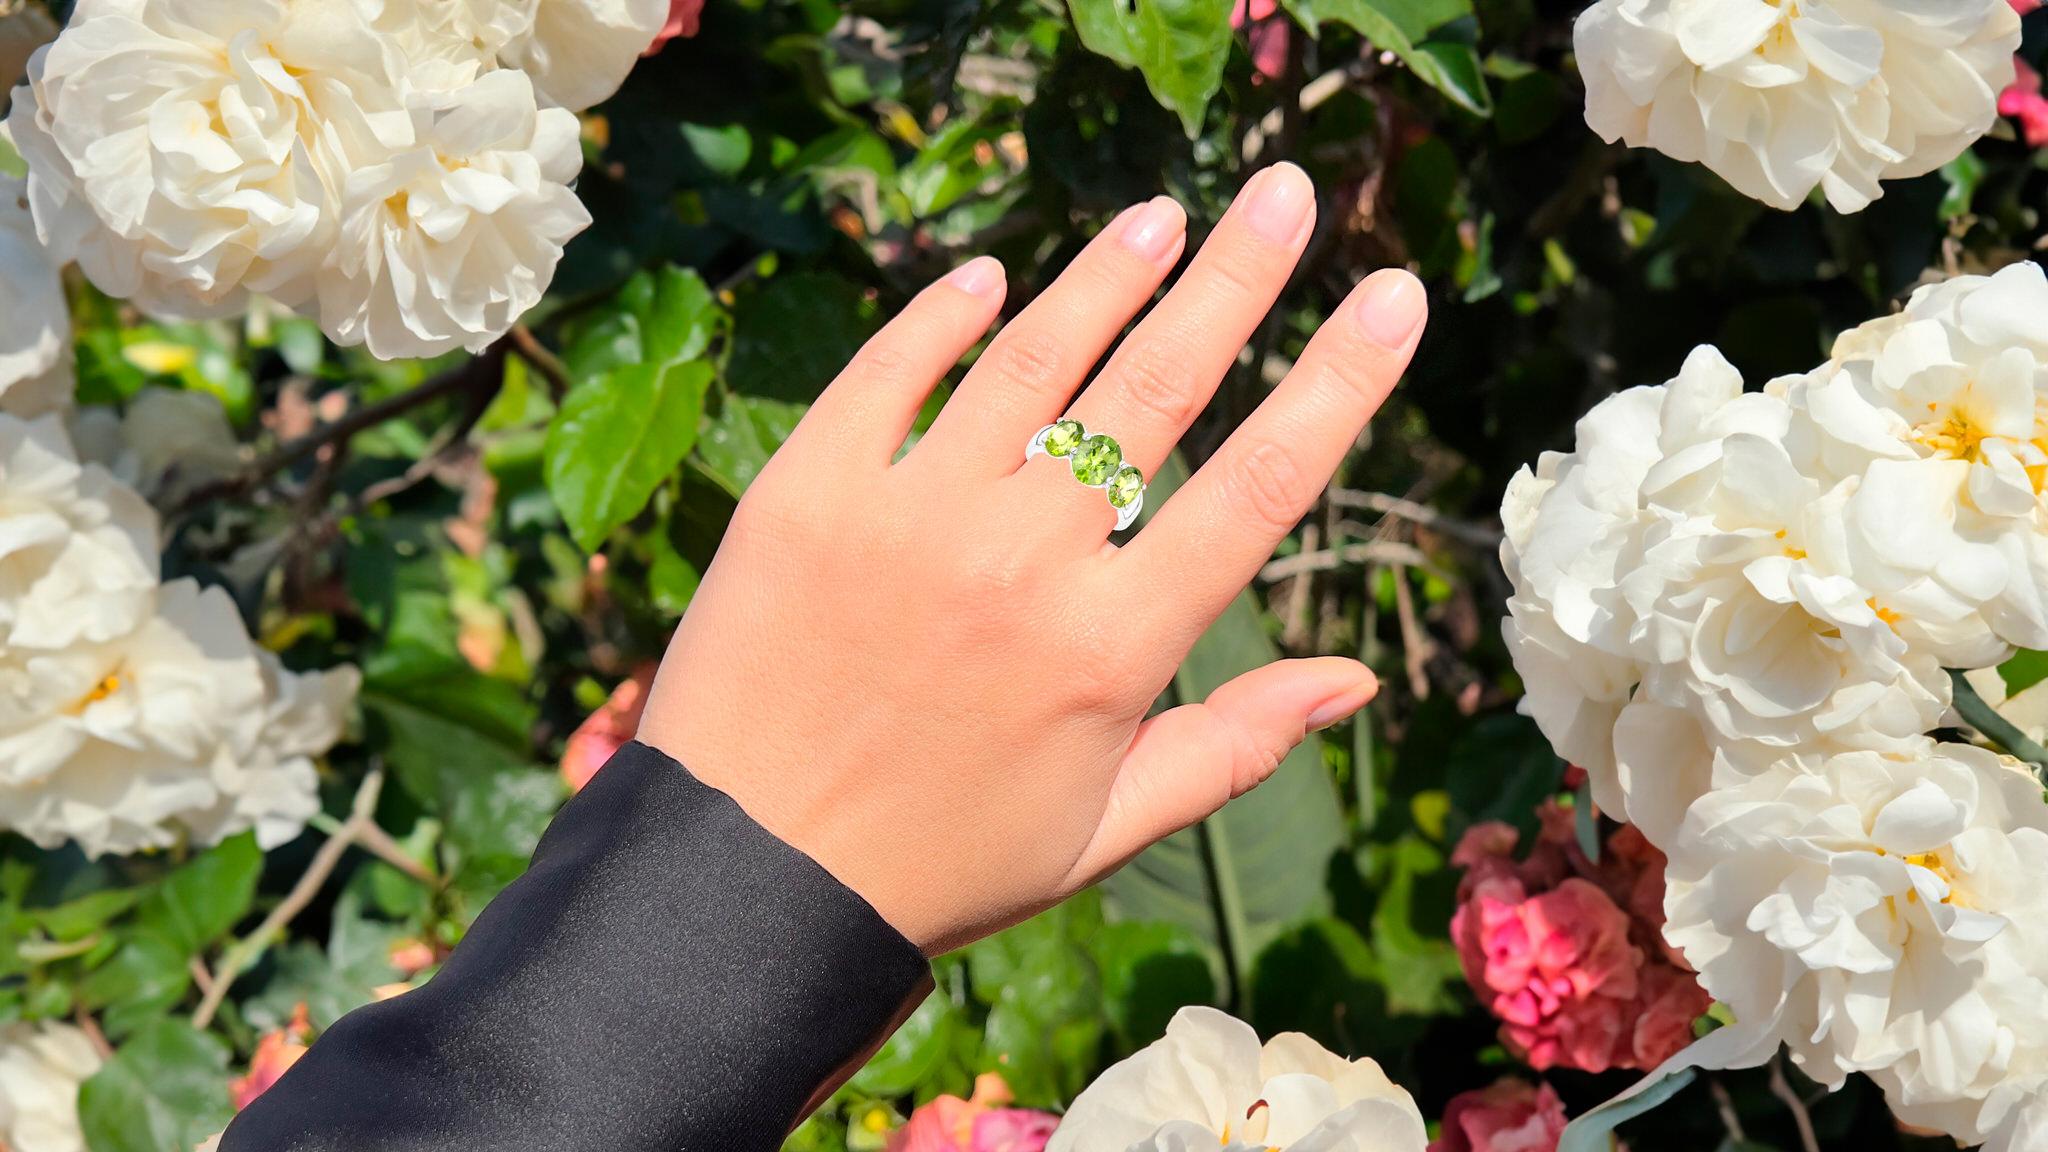 It comes with the Gemological Appraisal by GIA GG/AJP
All Gemstones are Natural
3 Peridots = 3.40 Carats
Metal: Rhodium Plated Sterling Silver
Ring Size: 7* US
*It can be resized complimentary